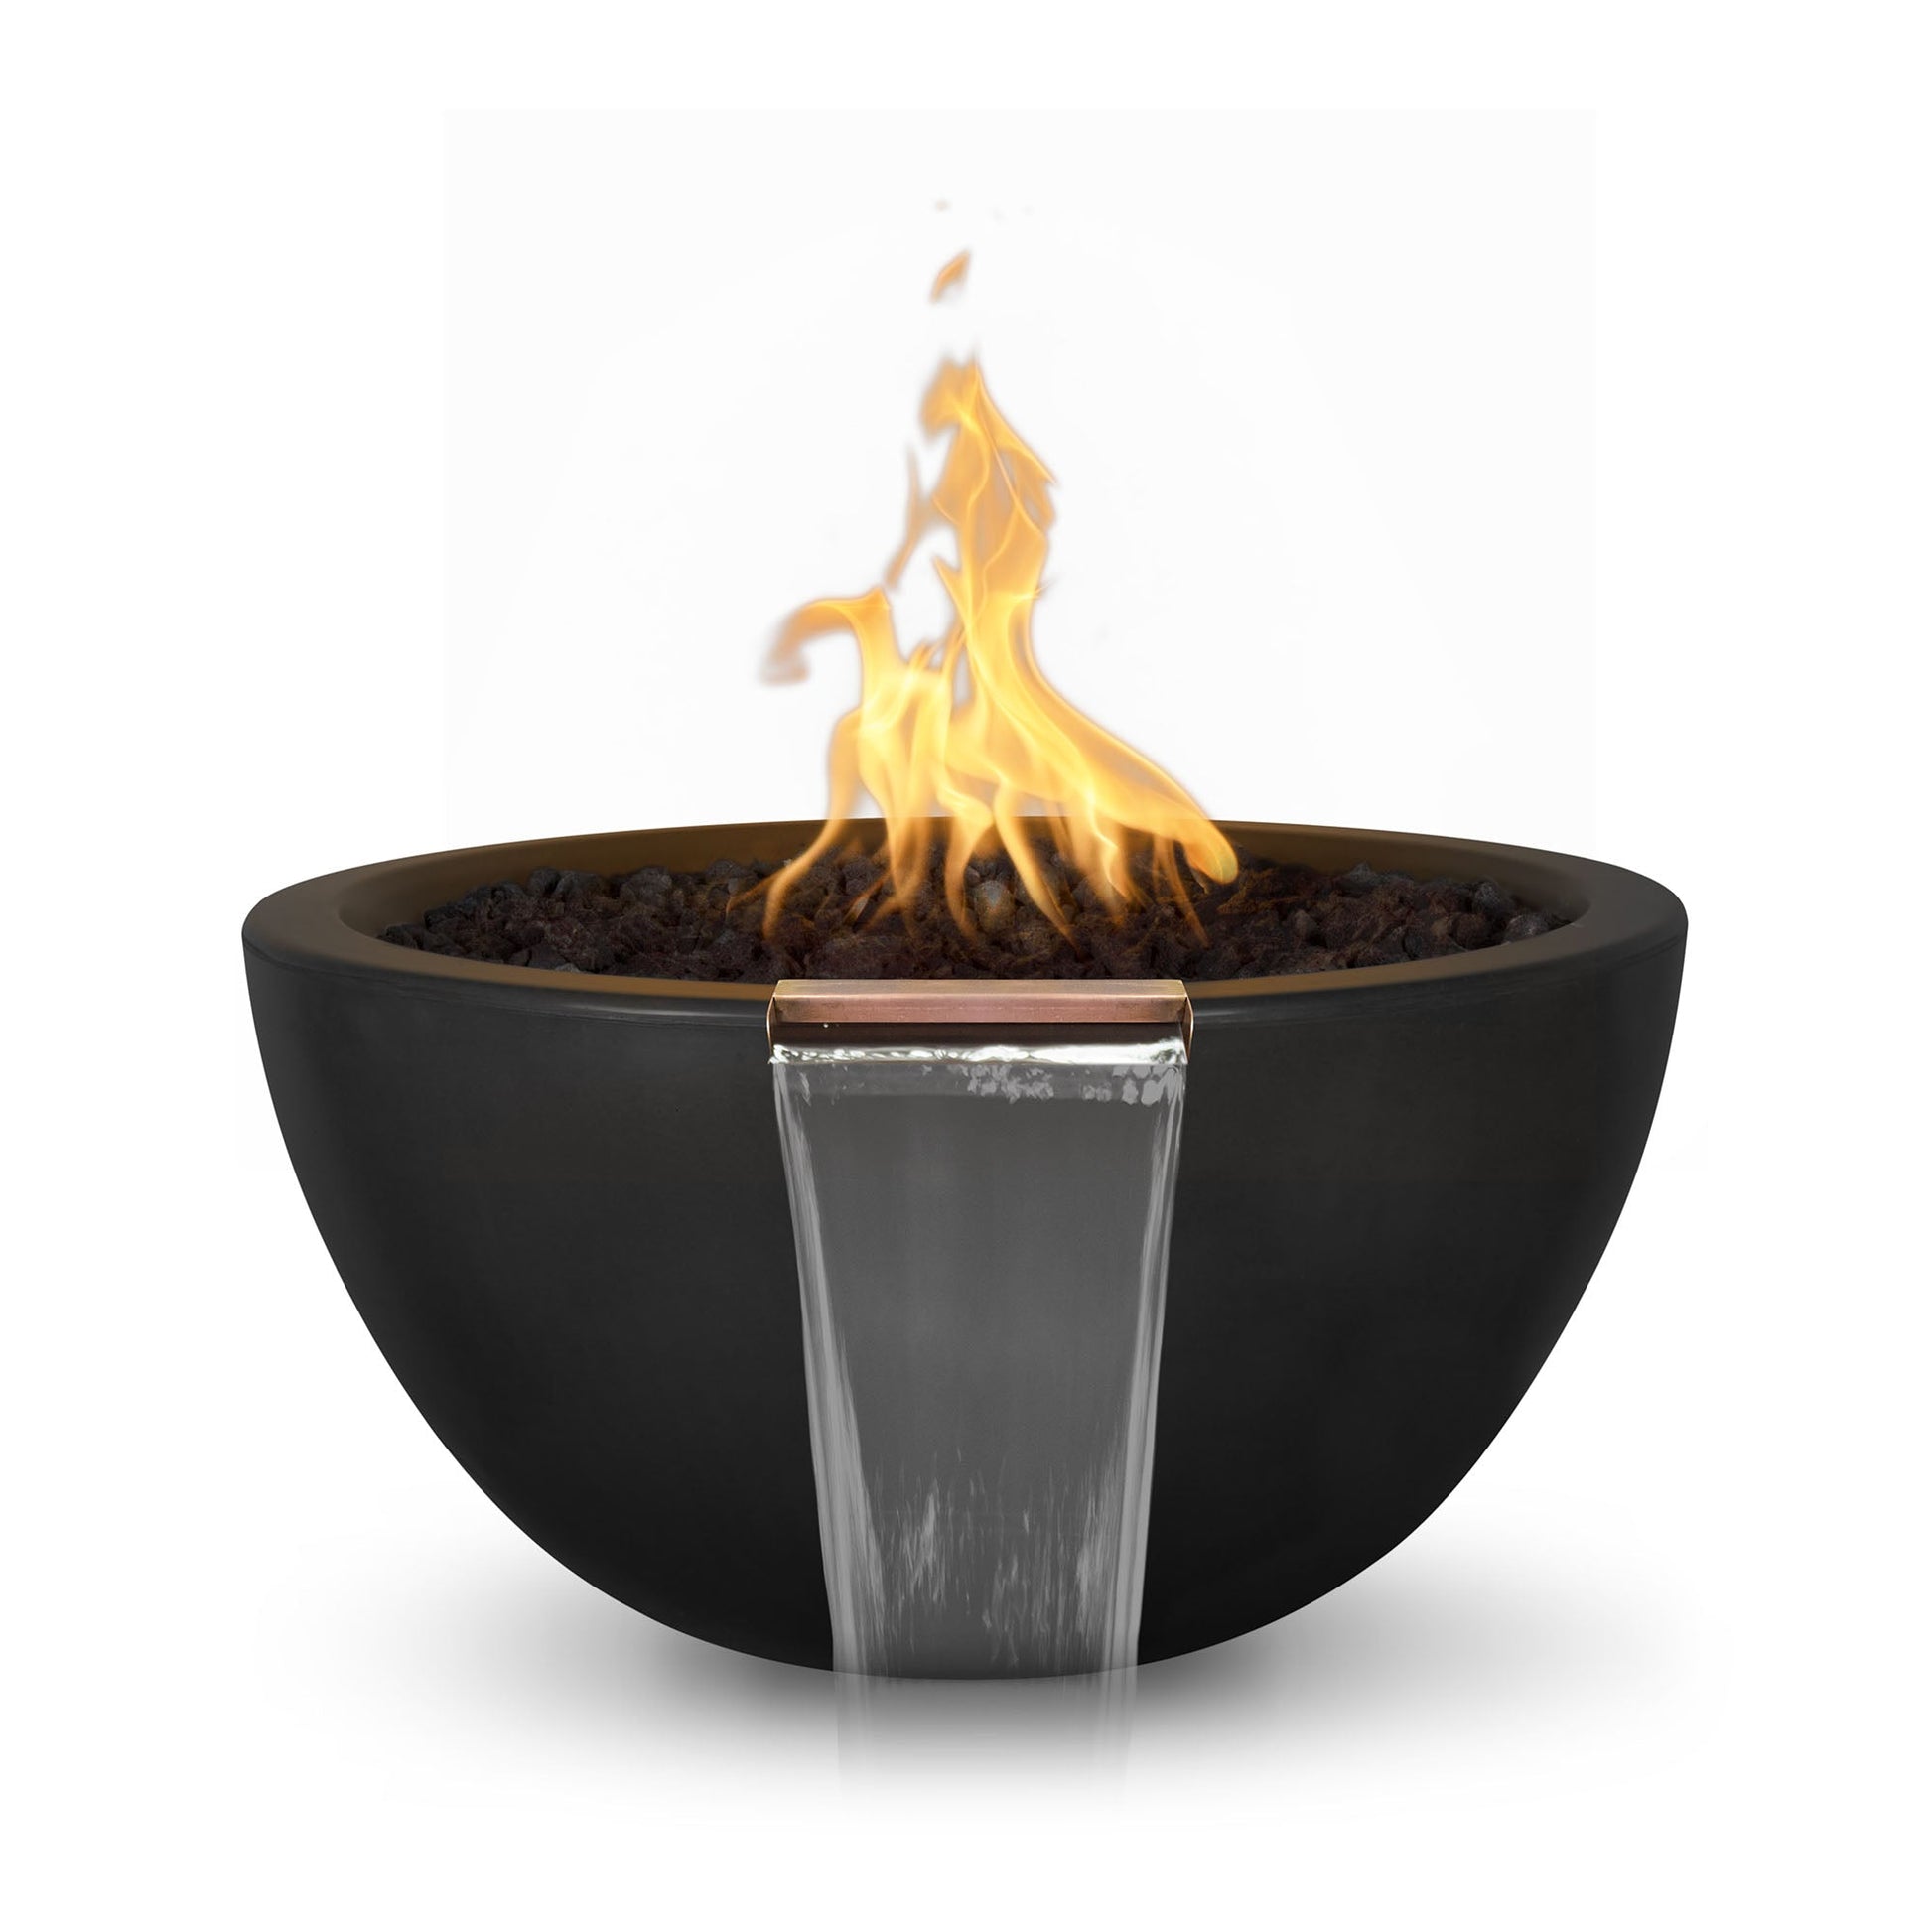 The Outdoor Plus Round Luna 30" Black GFRC Concrete Liquid Propane Fire & Water Bowl with Match Lit with Flame Sense Ignition